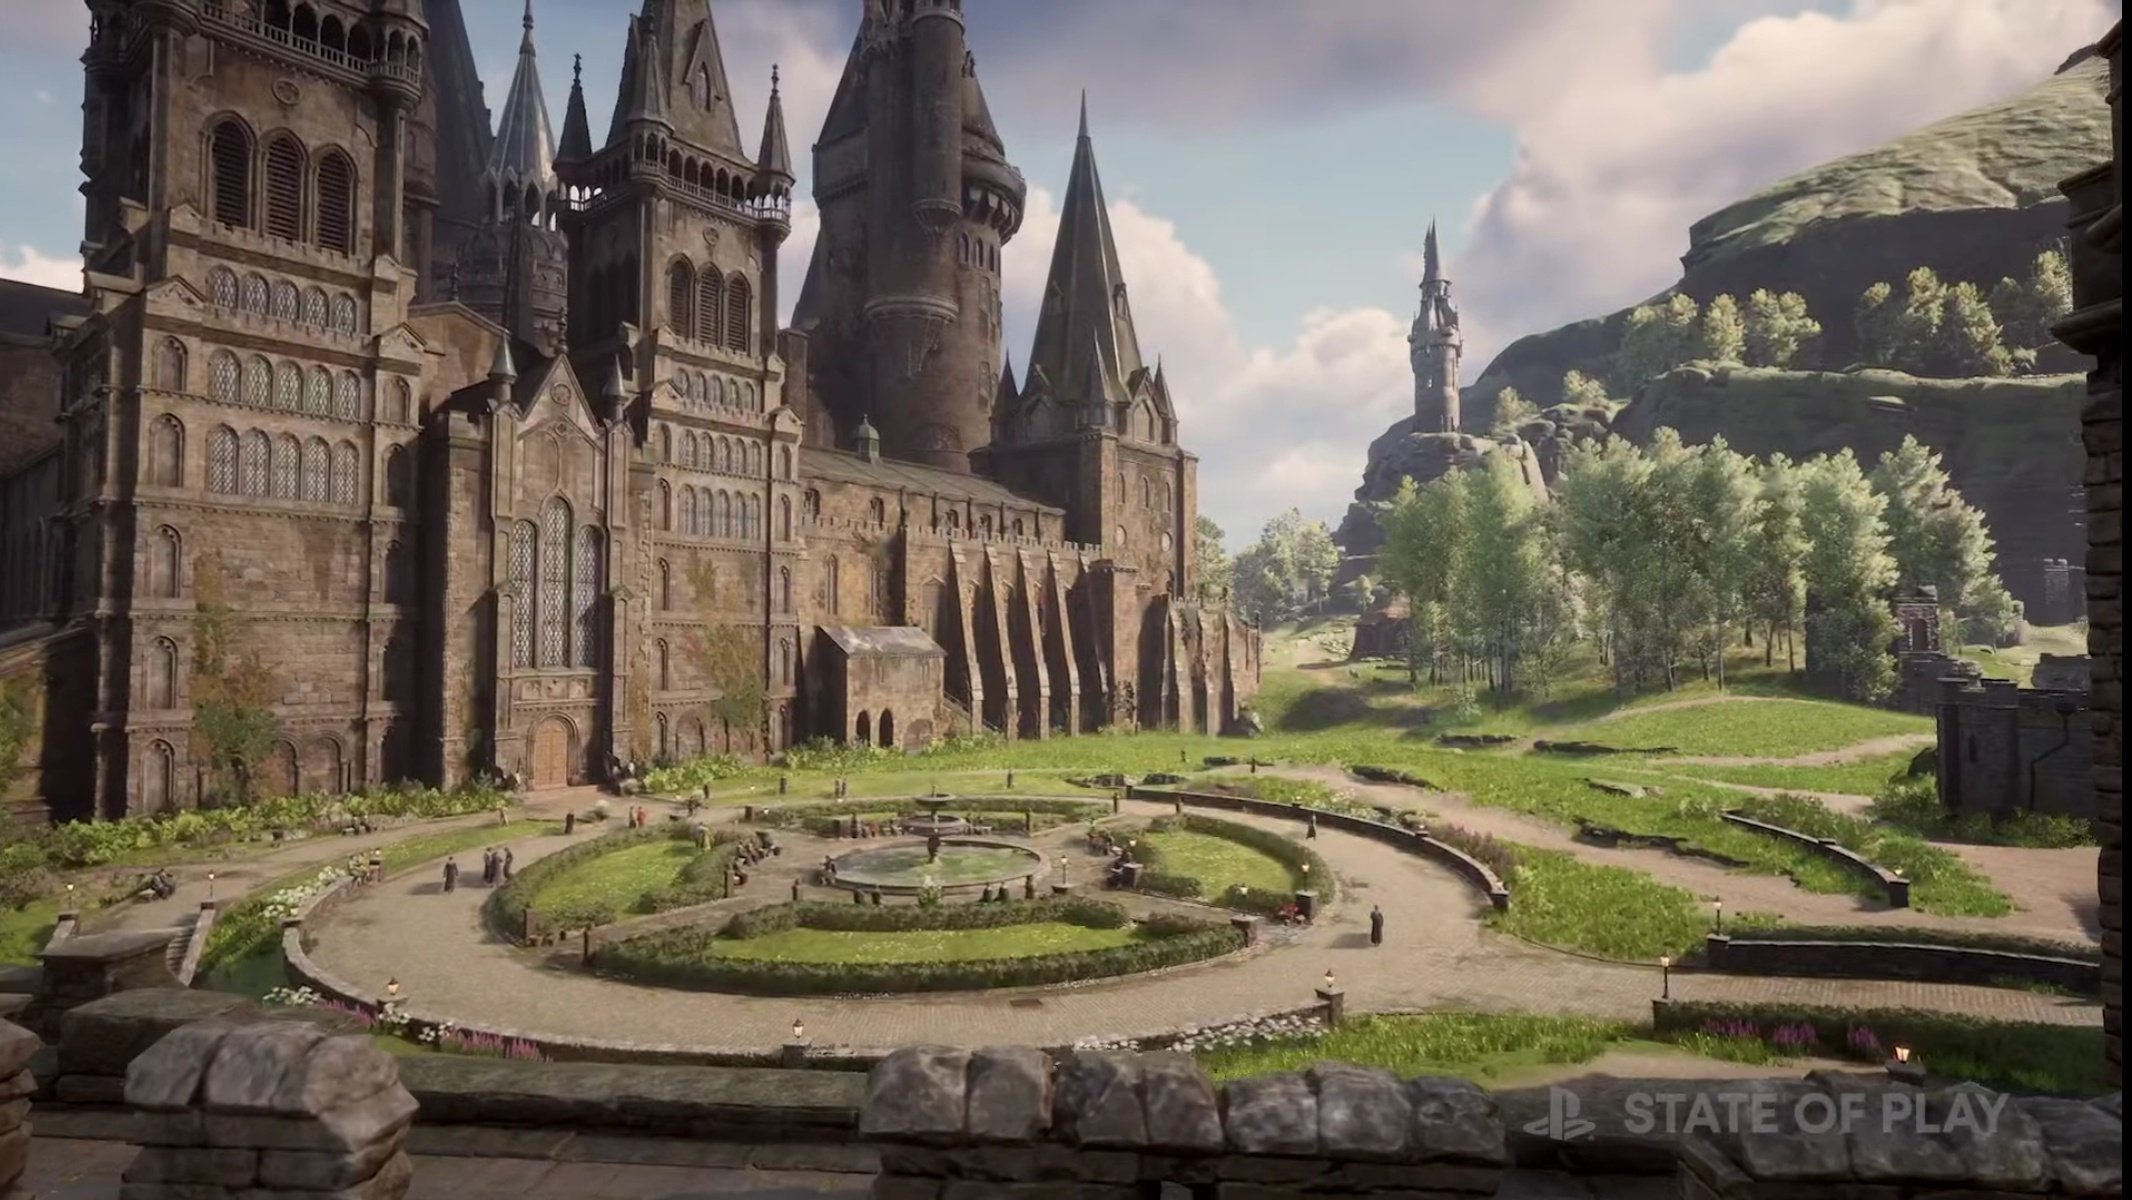 Hogwarts Legacy is coming to Nintendo Switch - but should it?